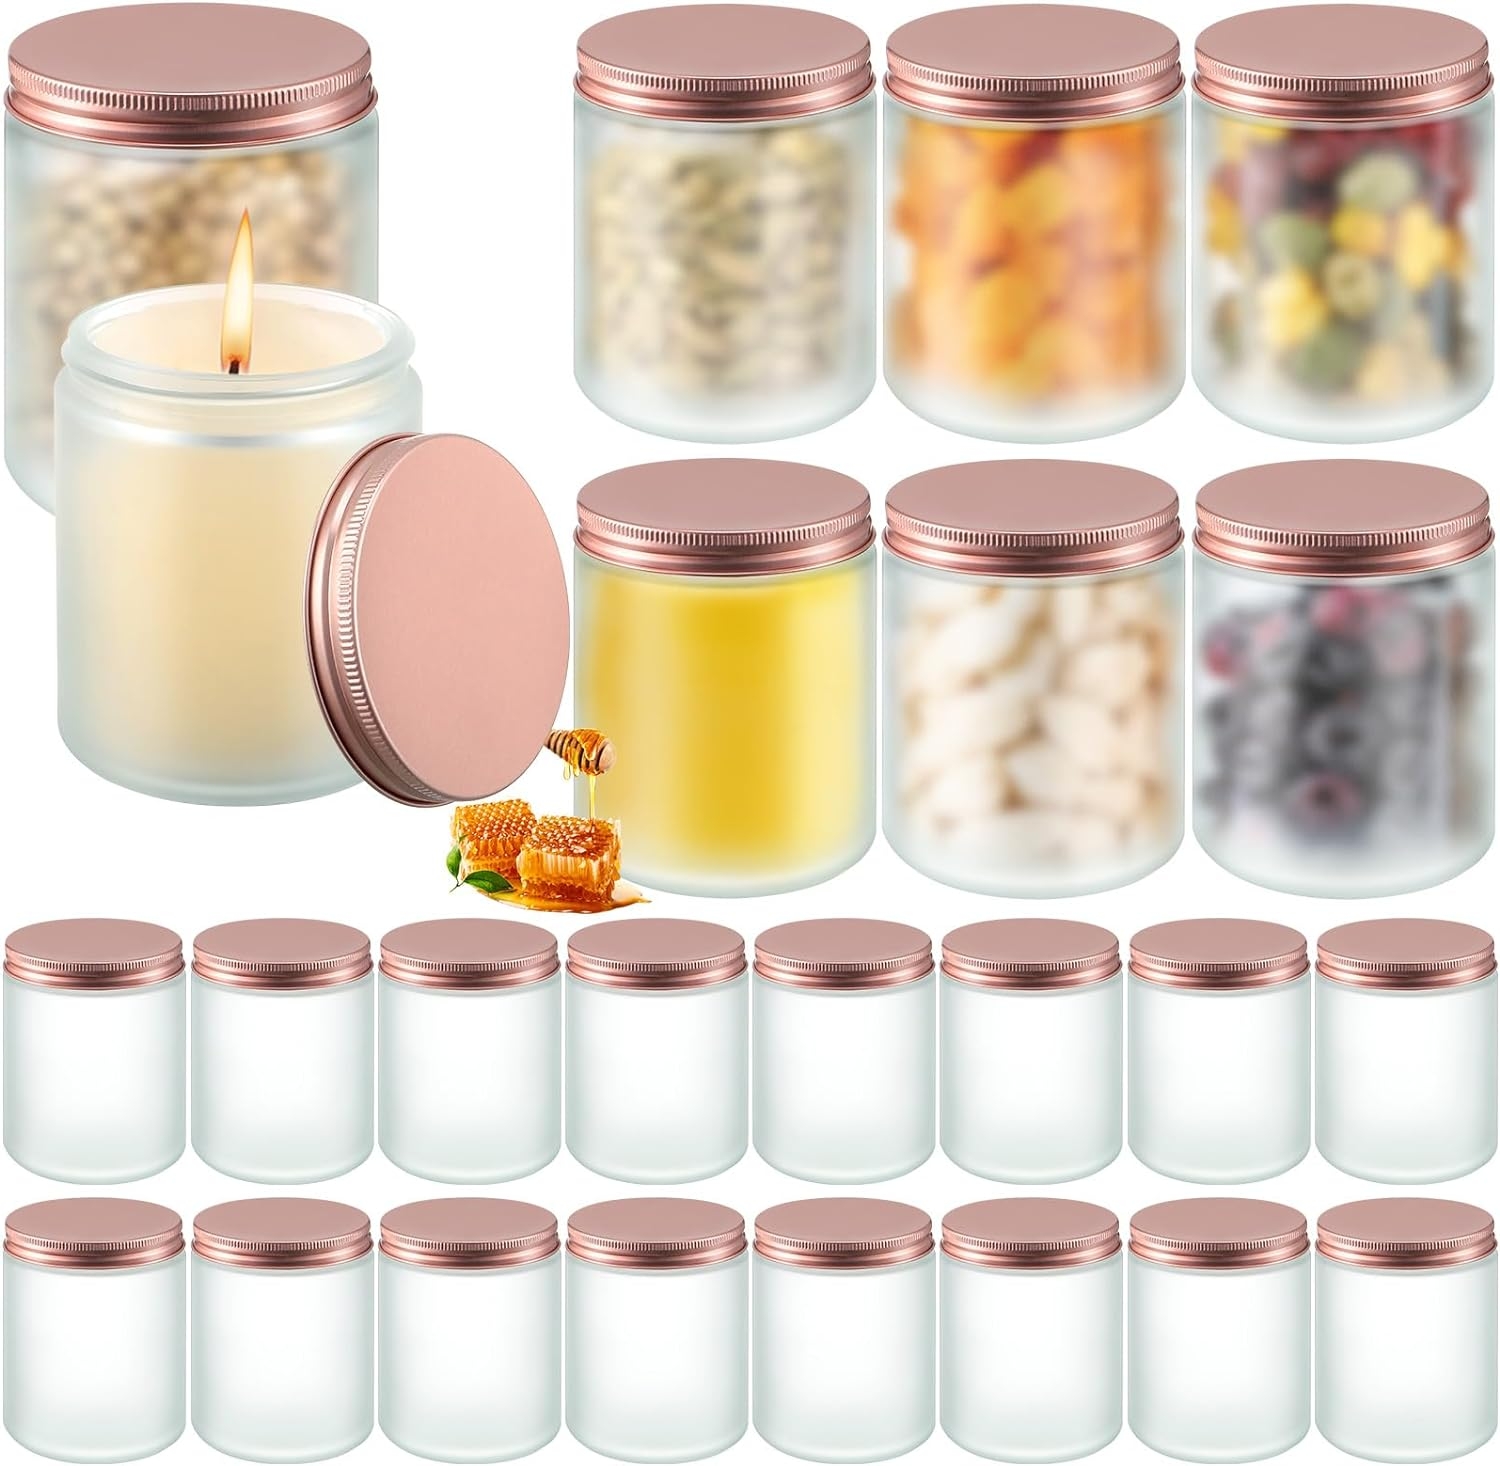 250ml Classic round Frosted Glass Candle Making Jar with Metal Rose Gold Lid for Kitchen Food Container Freshness Preservation